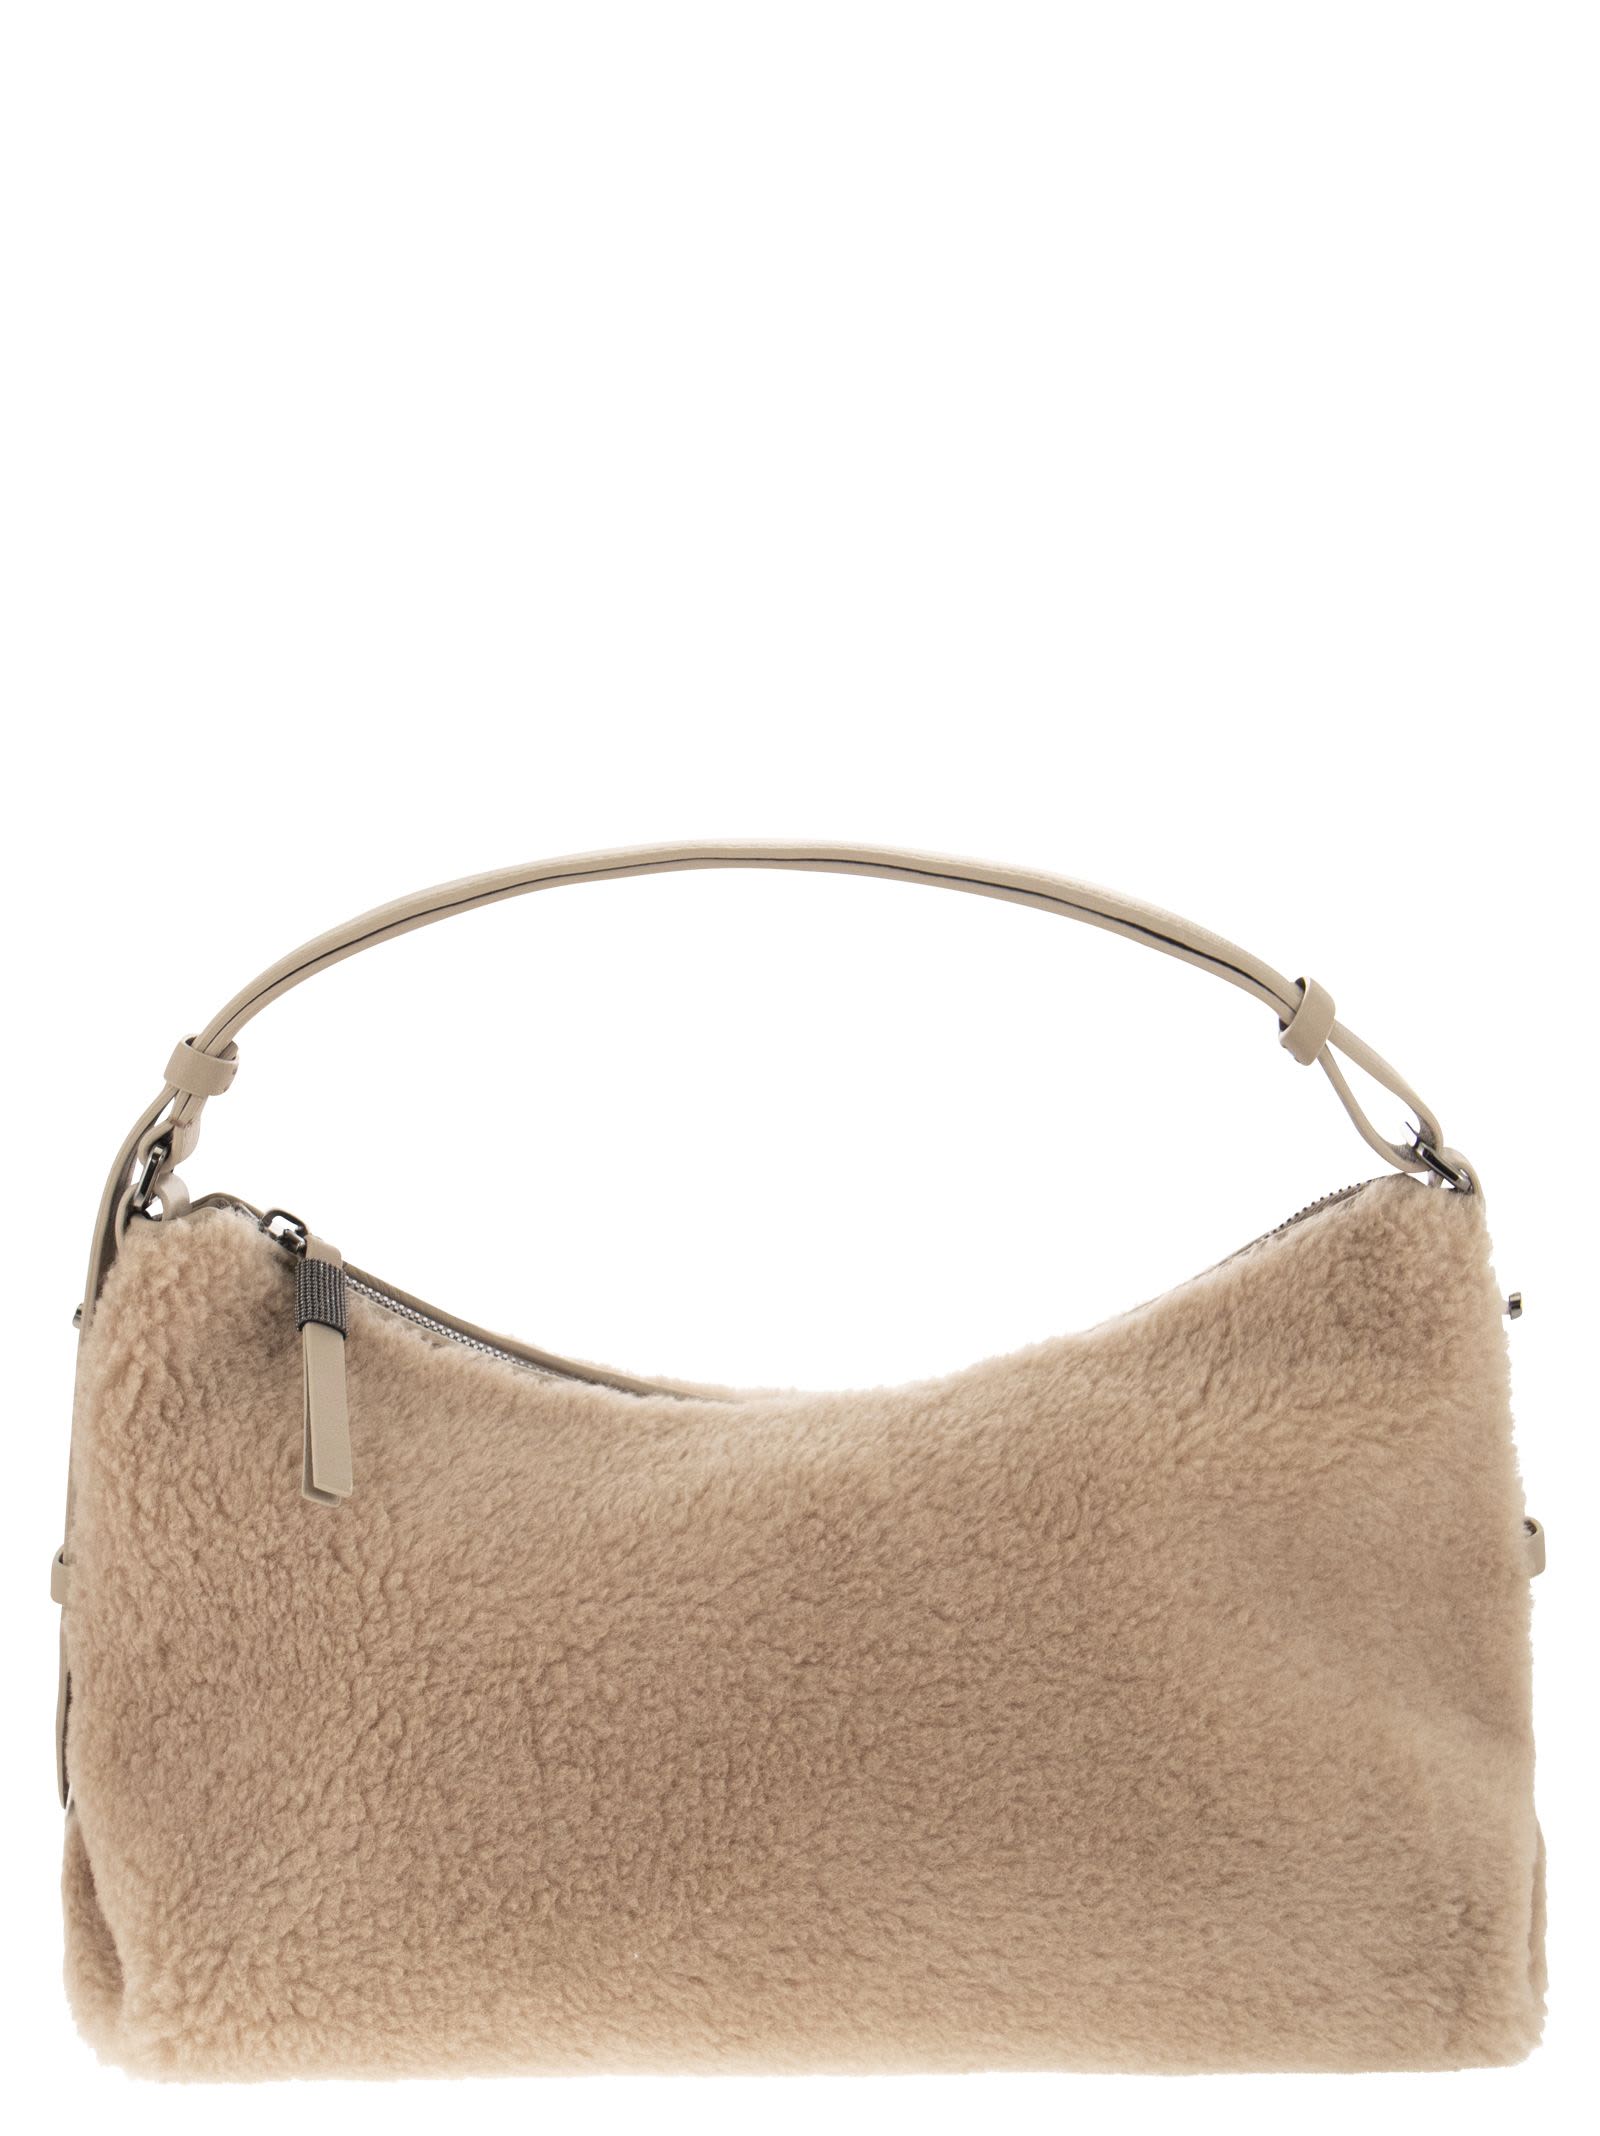 BRUNELLO CUCINELLI FLEECY BAG MADE OF VIRGIN WOOL AND CASHMERE WITH NECKLACE